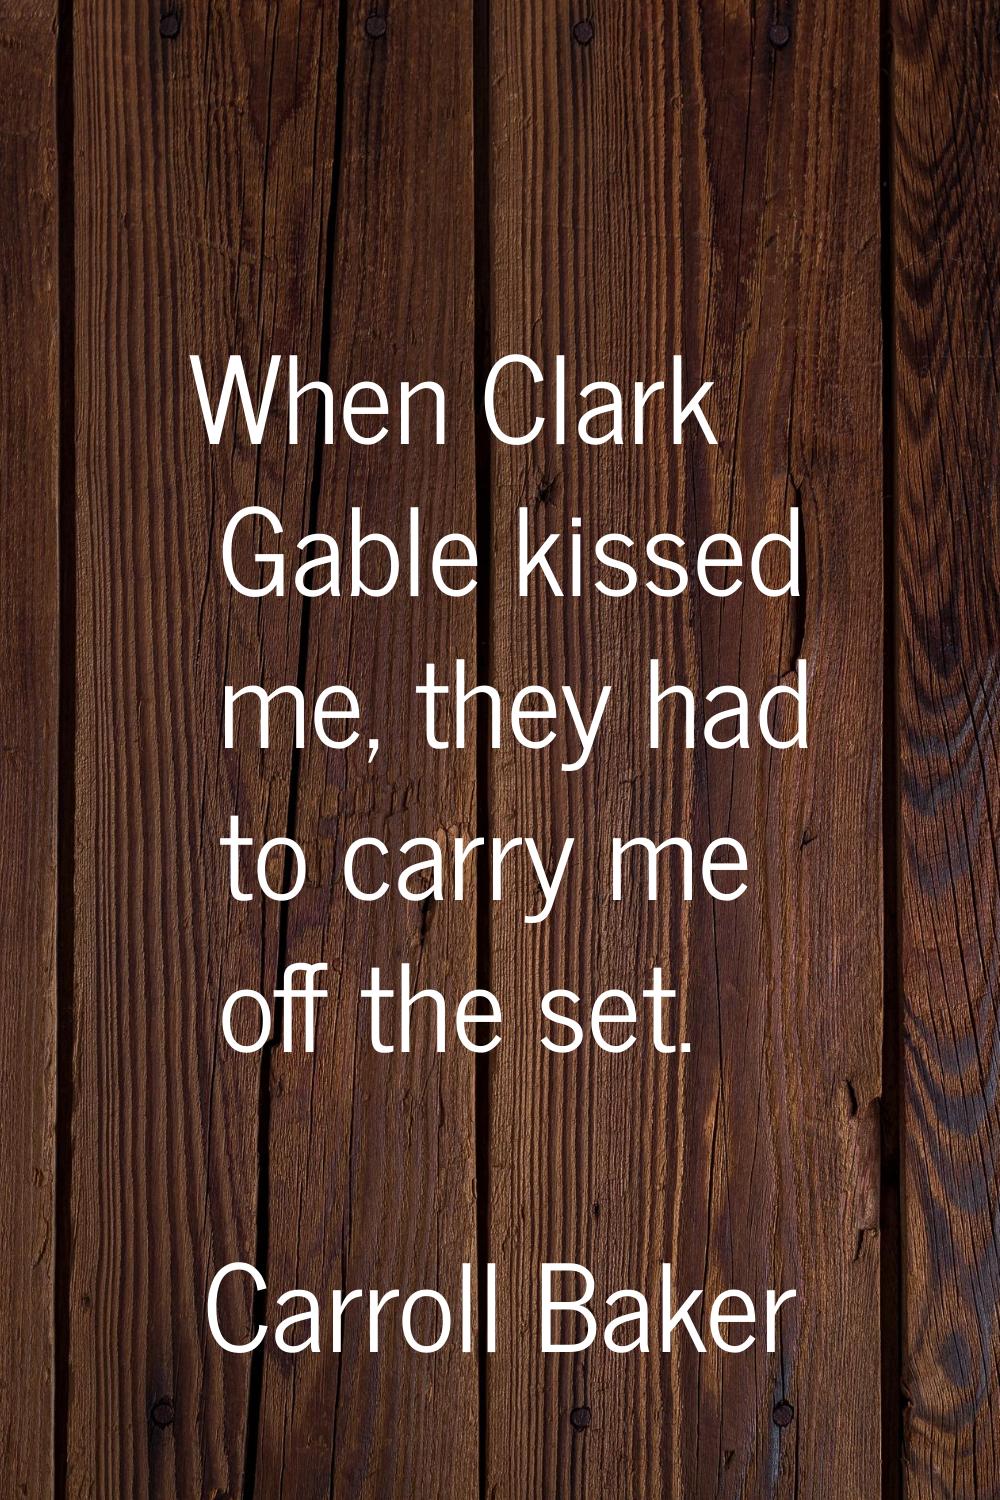 When Clark Gable kissed me, they had to carry me off the set.